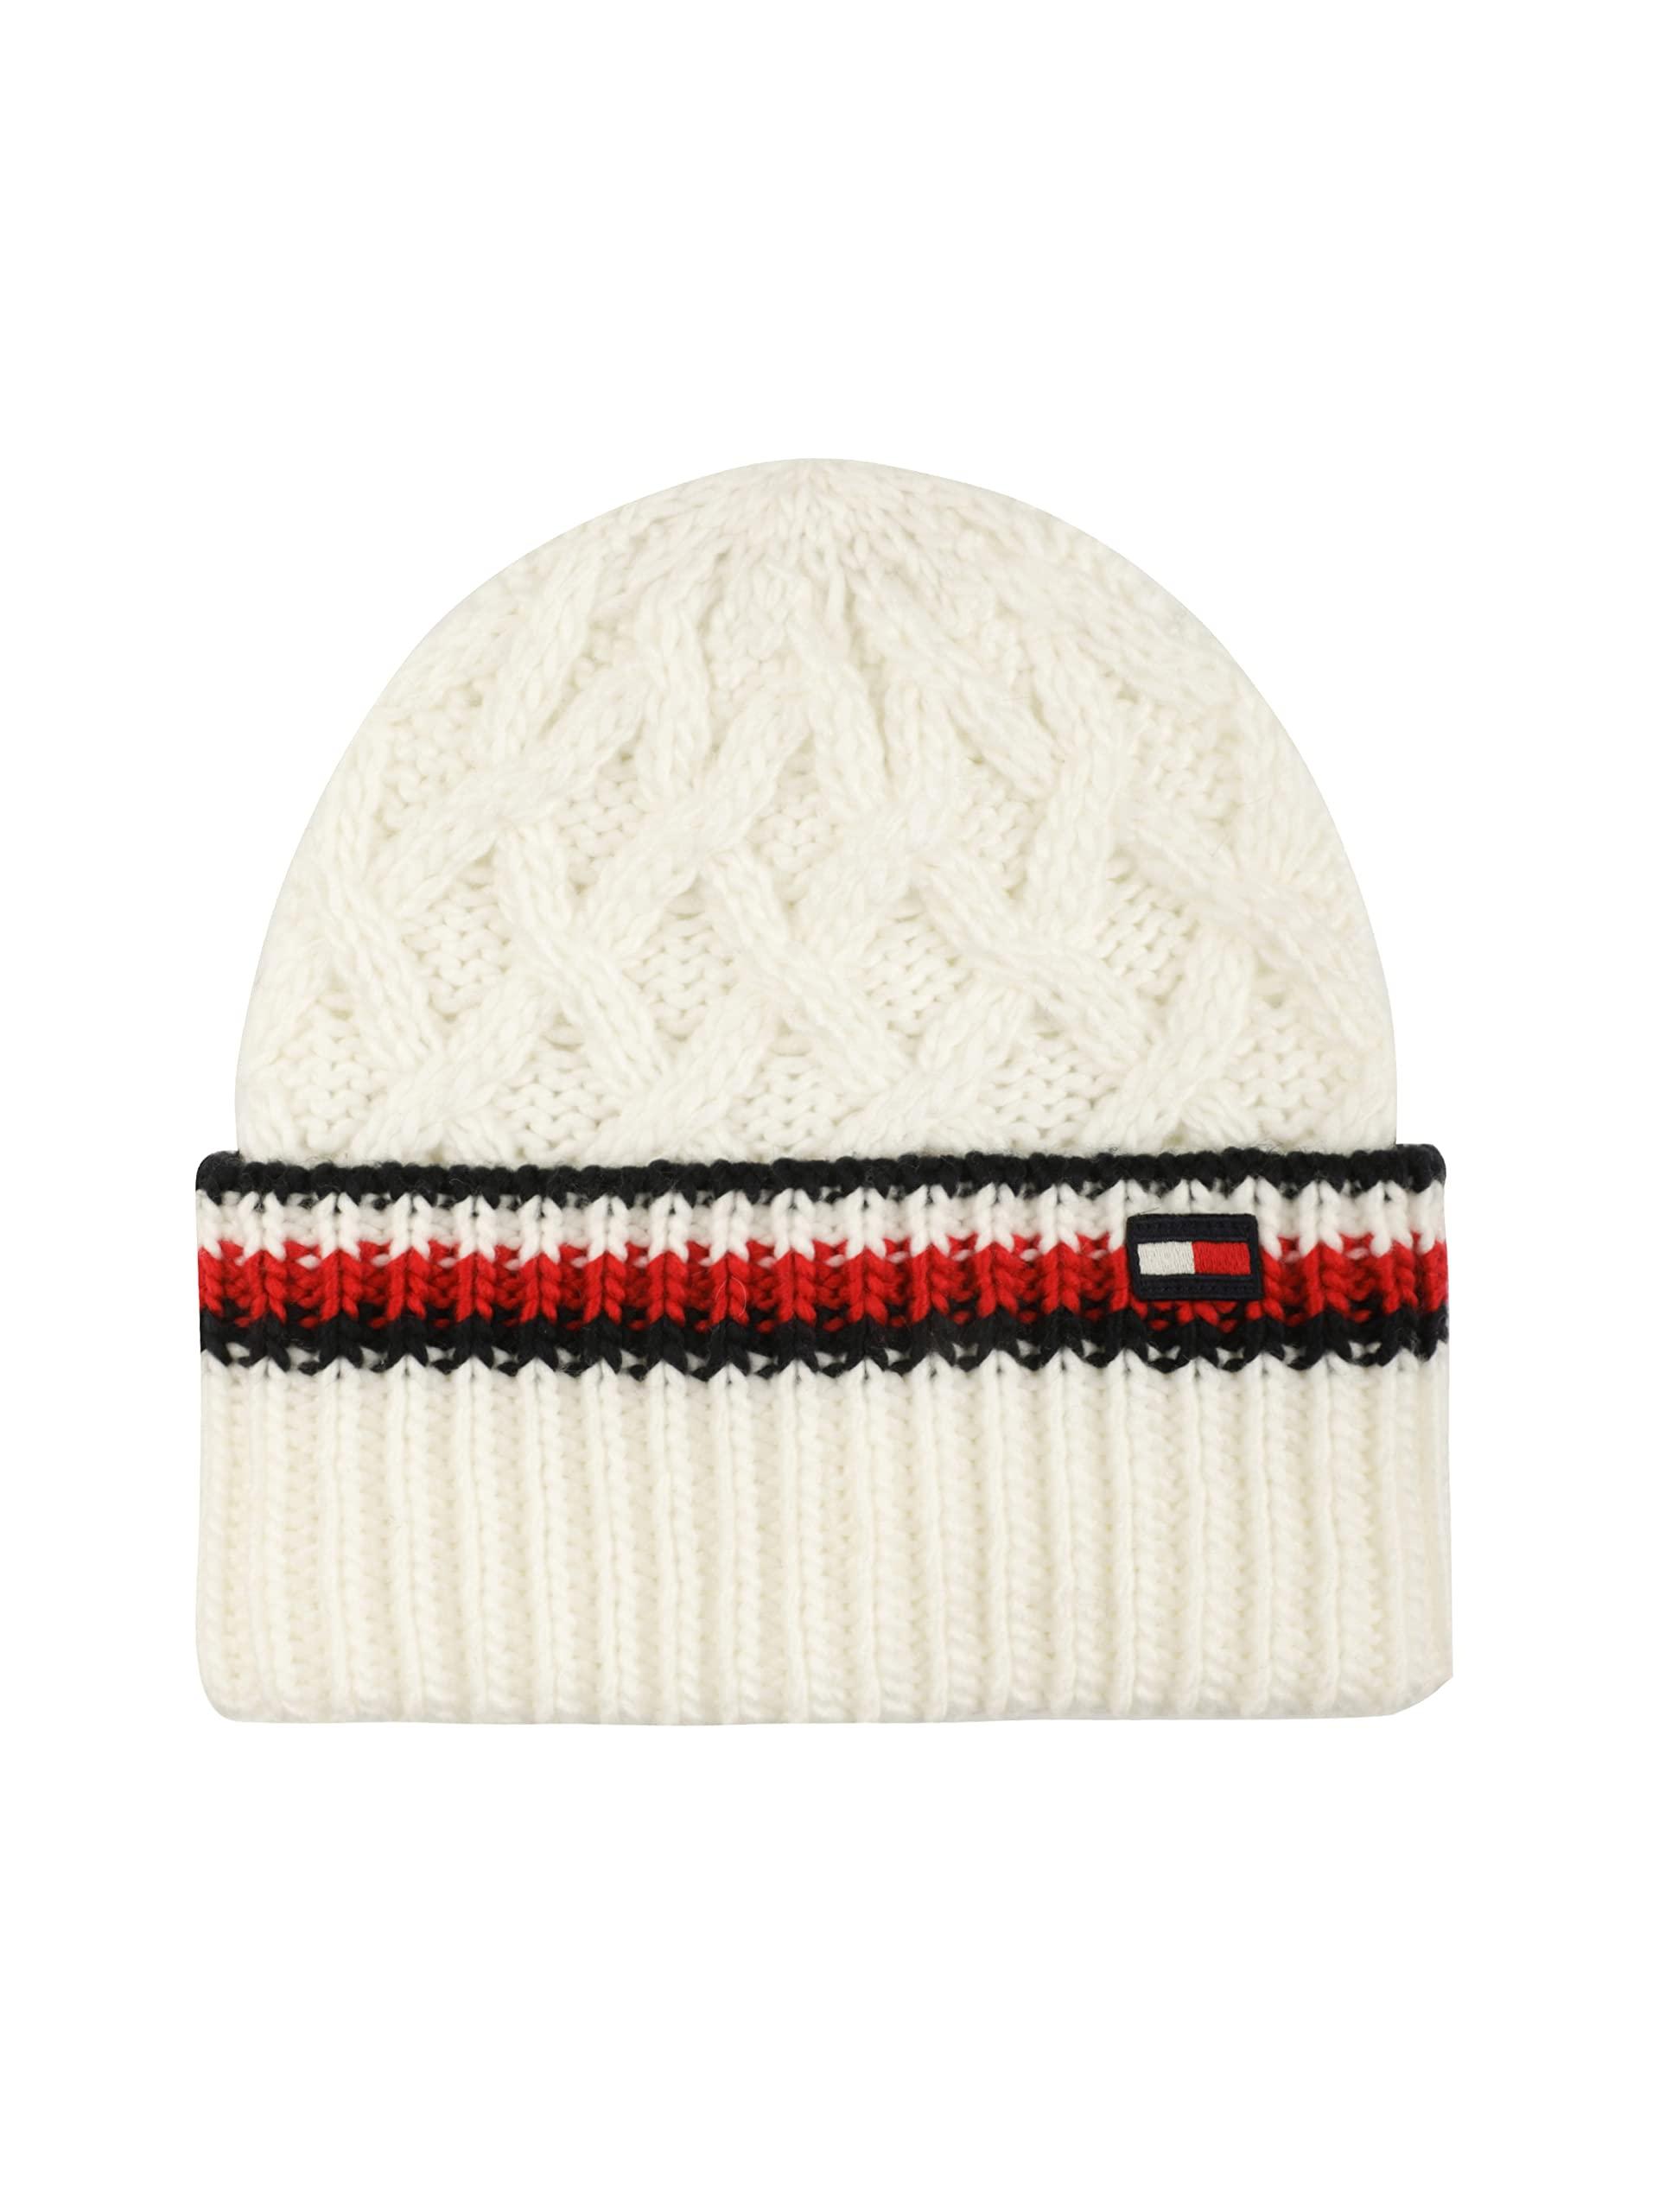 Tommy Hilfiger Lattice Cable With Stripes Cuff Hat Beanie in White | Lyst